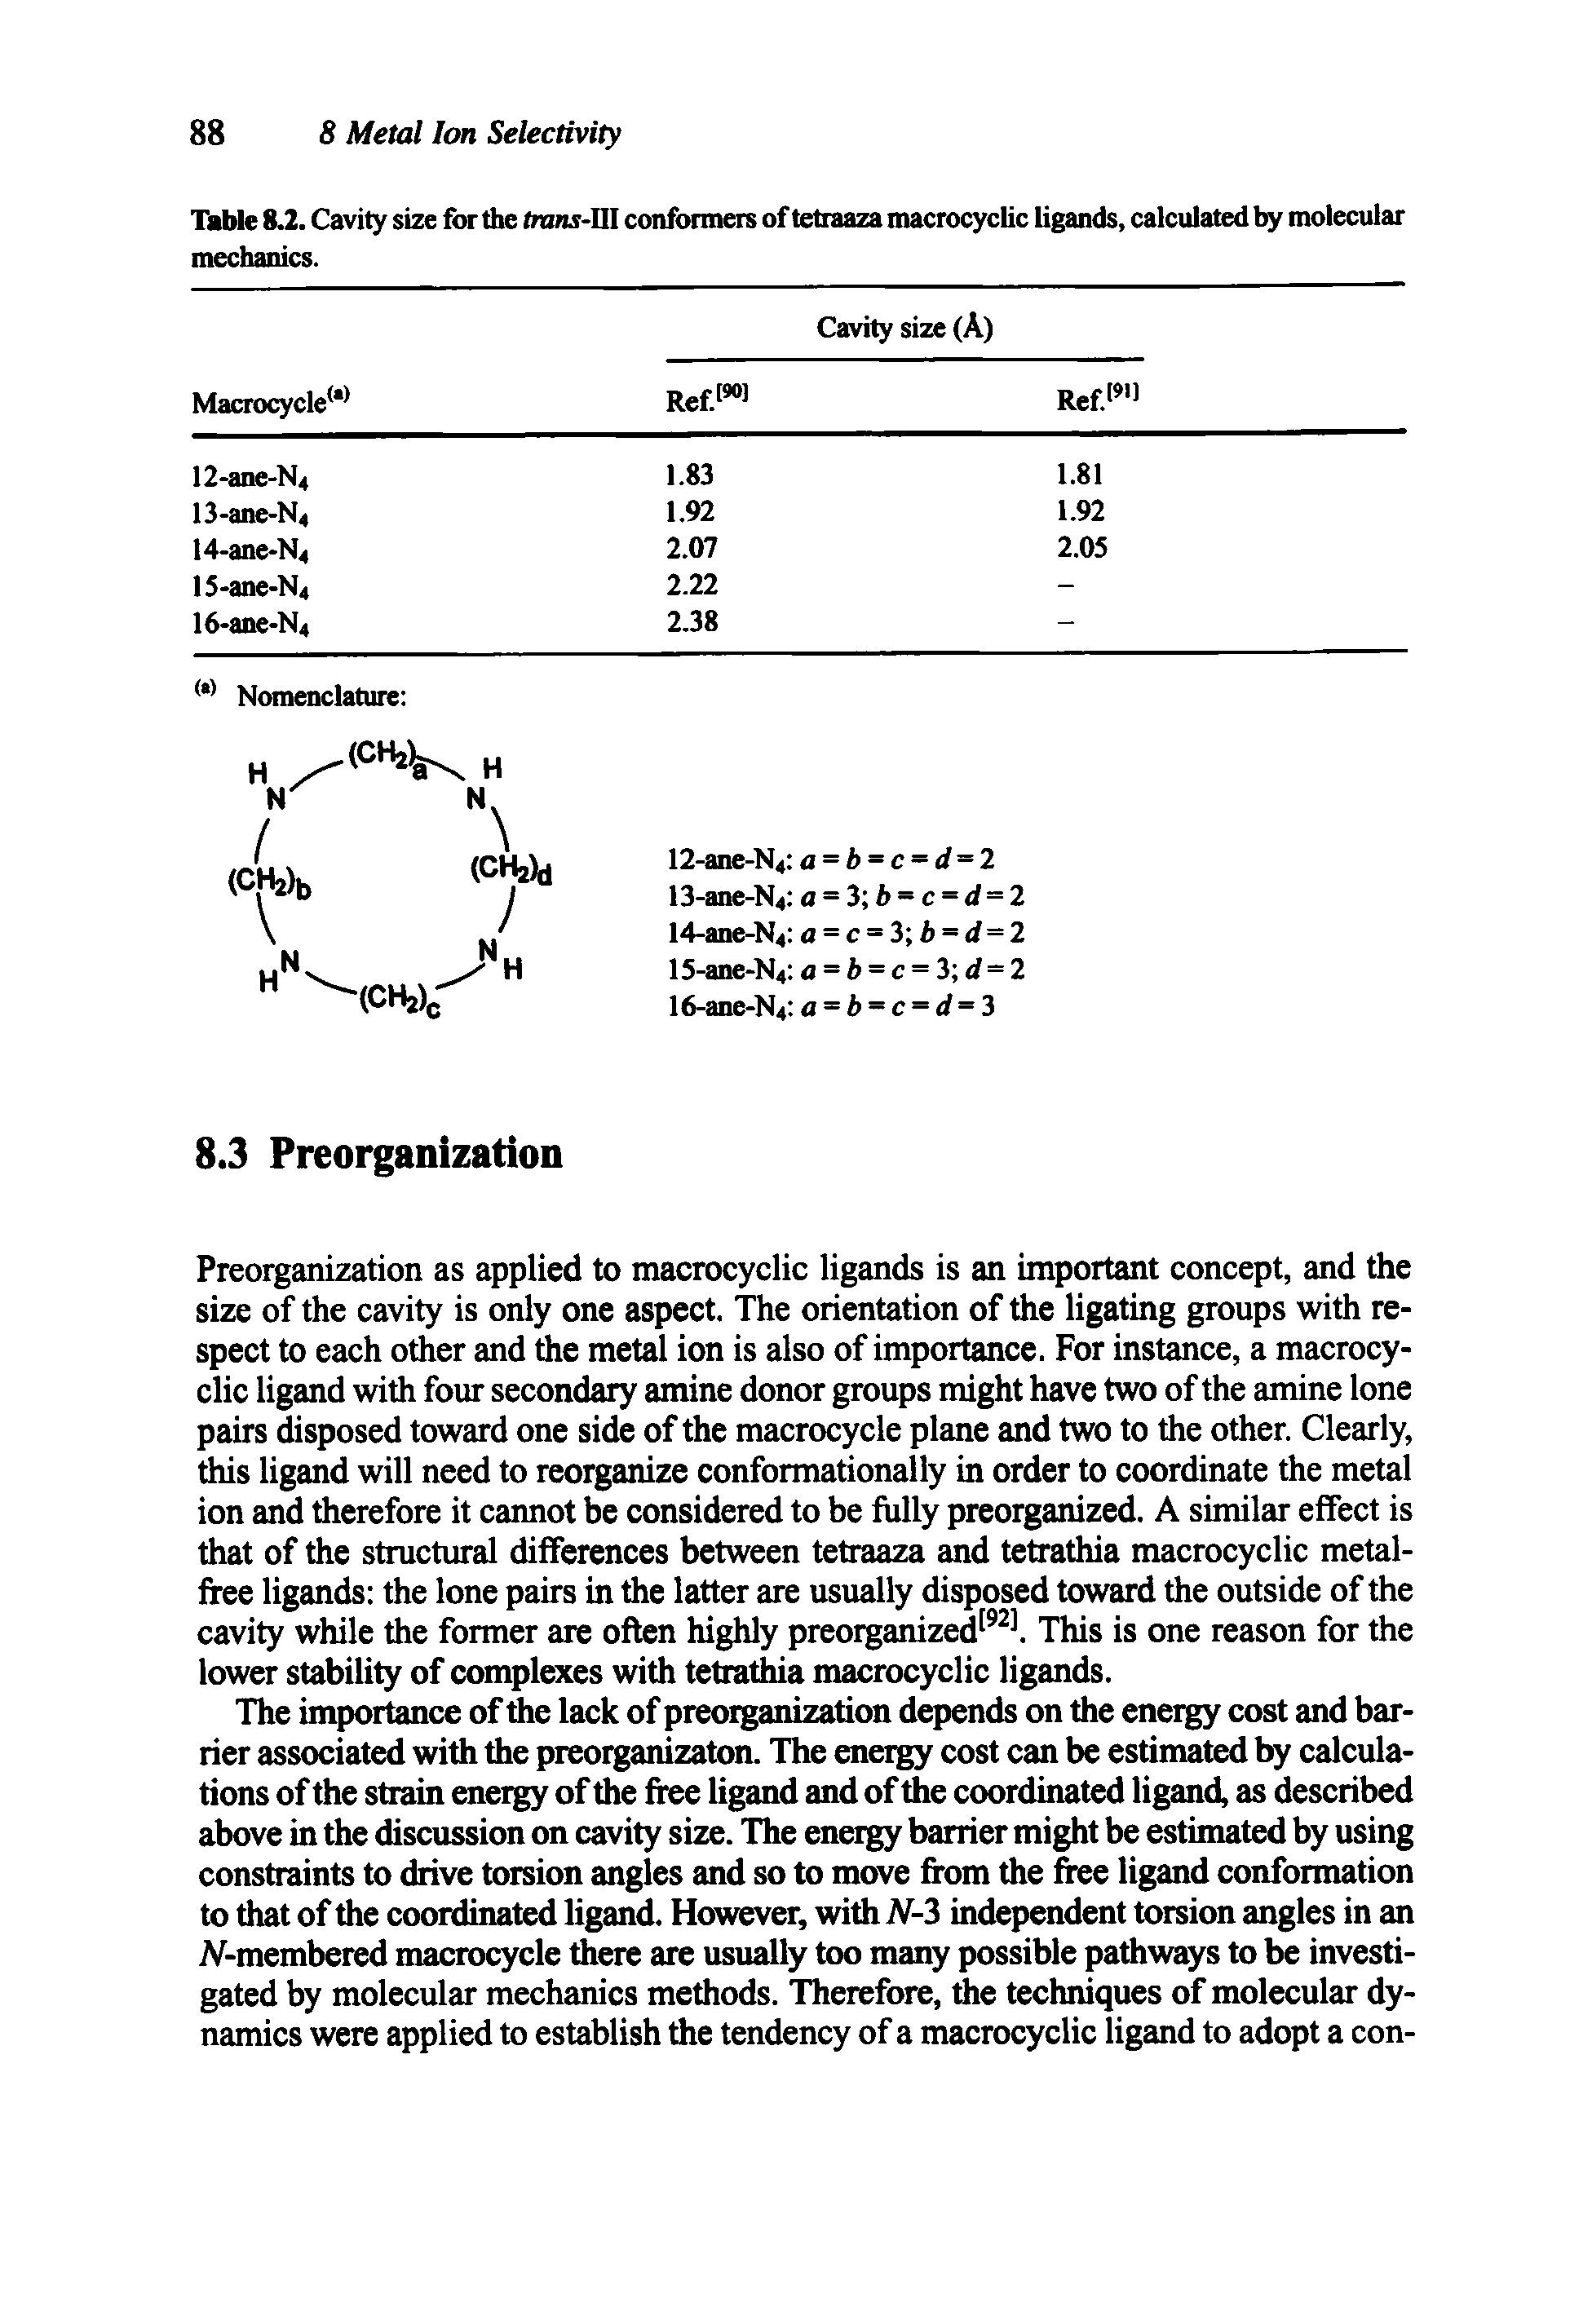 Table 8.2. Cavity size for the tavu-III conformers of tetraaza macrocyclic ligands, calculated by molecular mechanics.